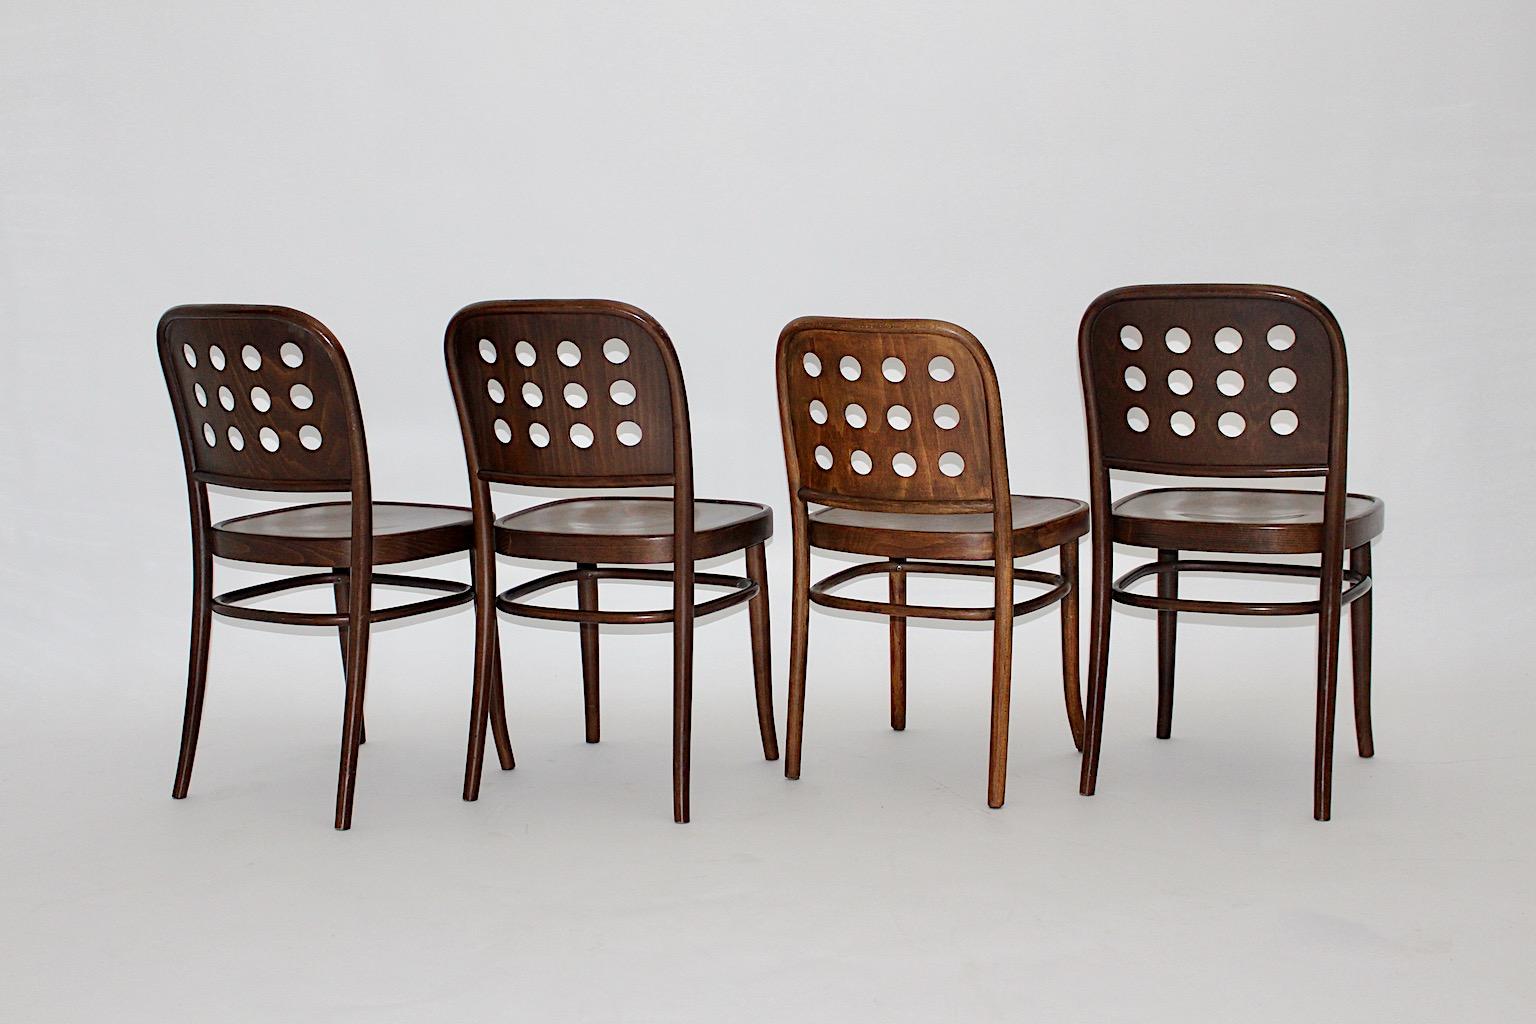 20th Century Modernist Vintage Four Brown Dining Chairs Style Josef Hoffmann, 1990s